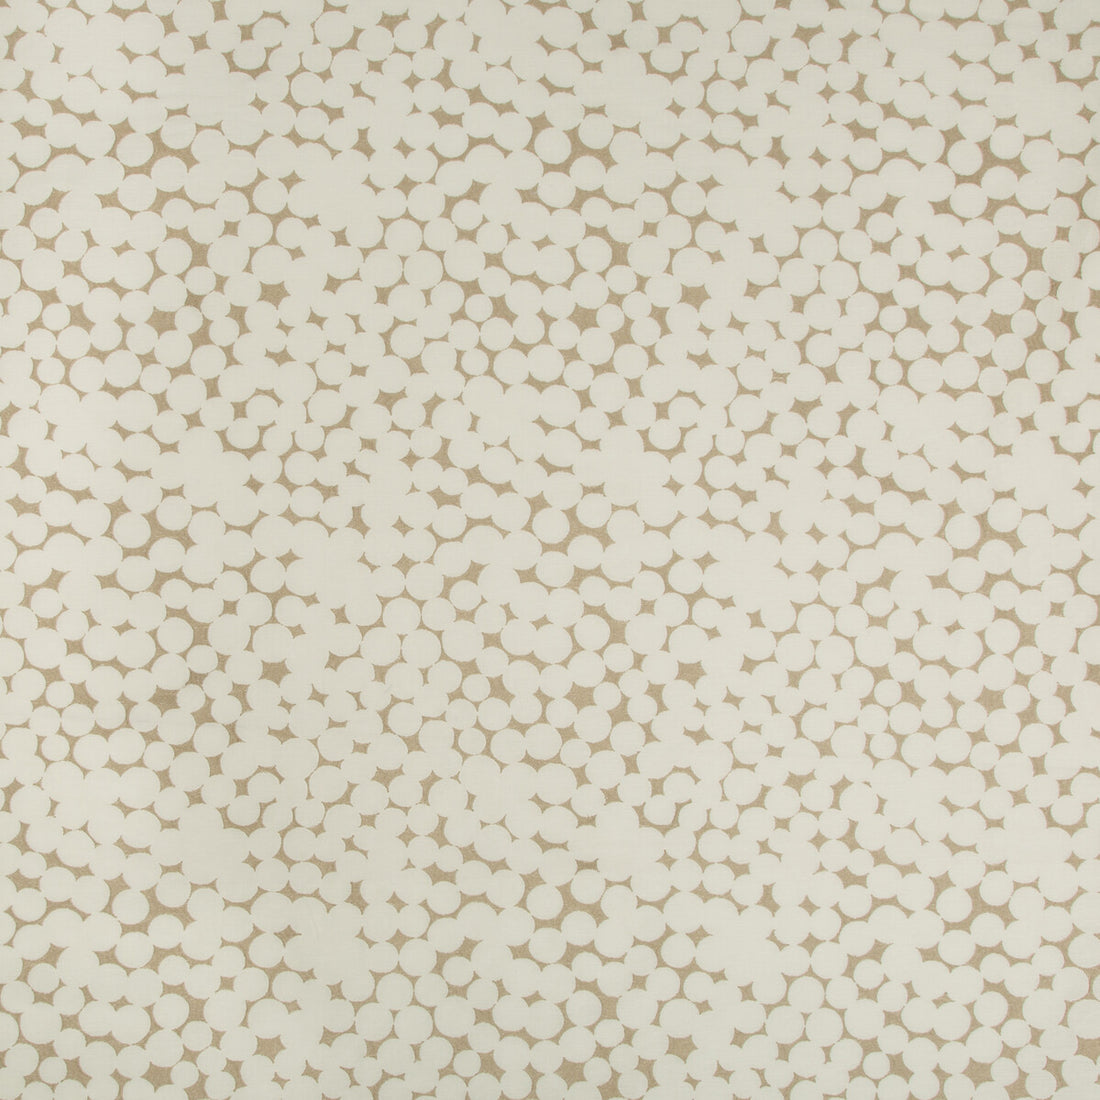 Olivos fabric in fawn color - pattern 4474.16.0 - by Kravet Couture in the Sue Firestone Malibu collection